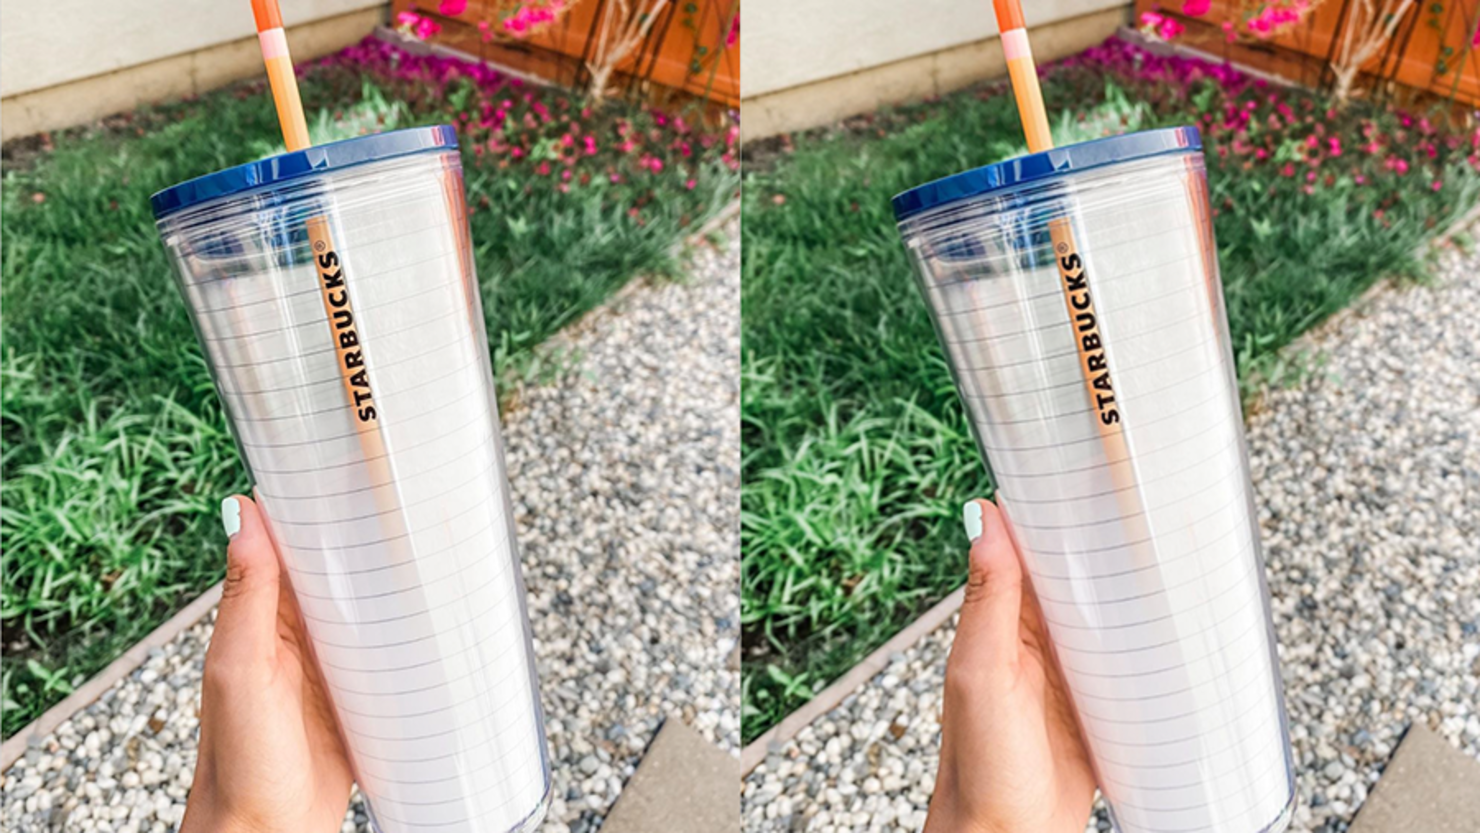 Starbucks' notebook tumbler with pencil straw is the perfect end